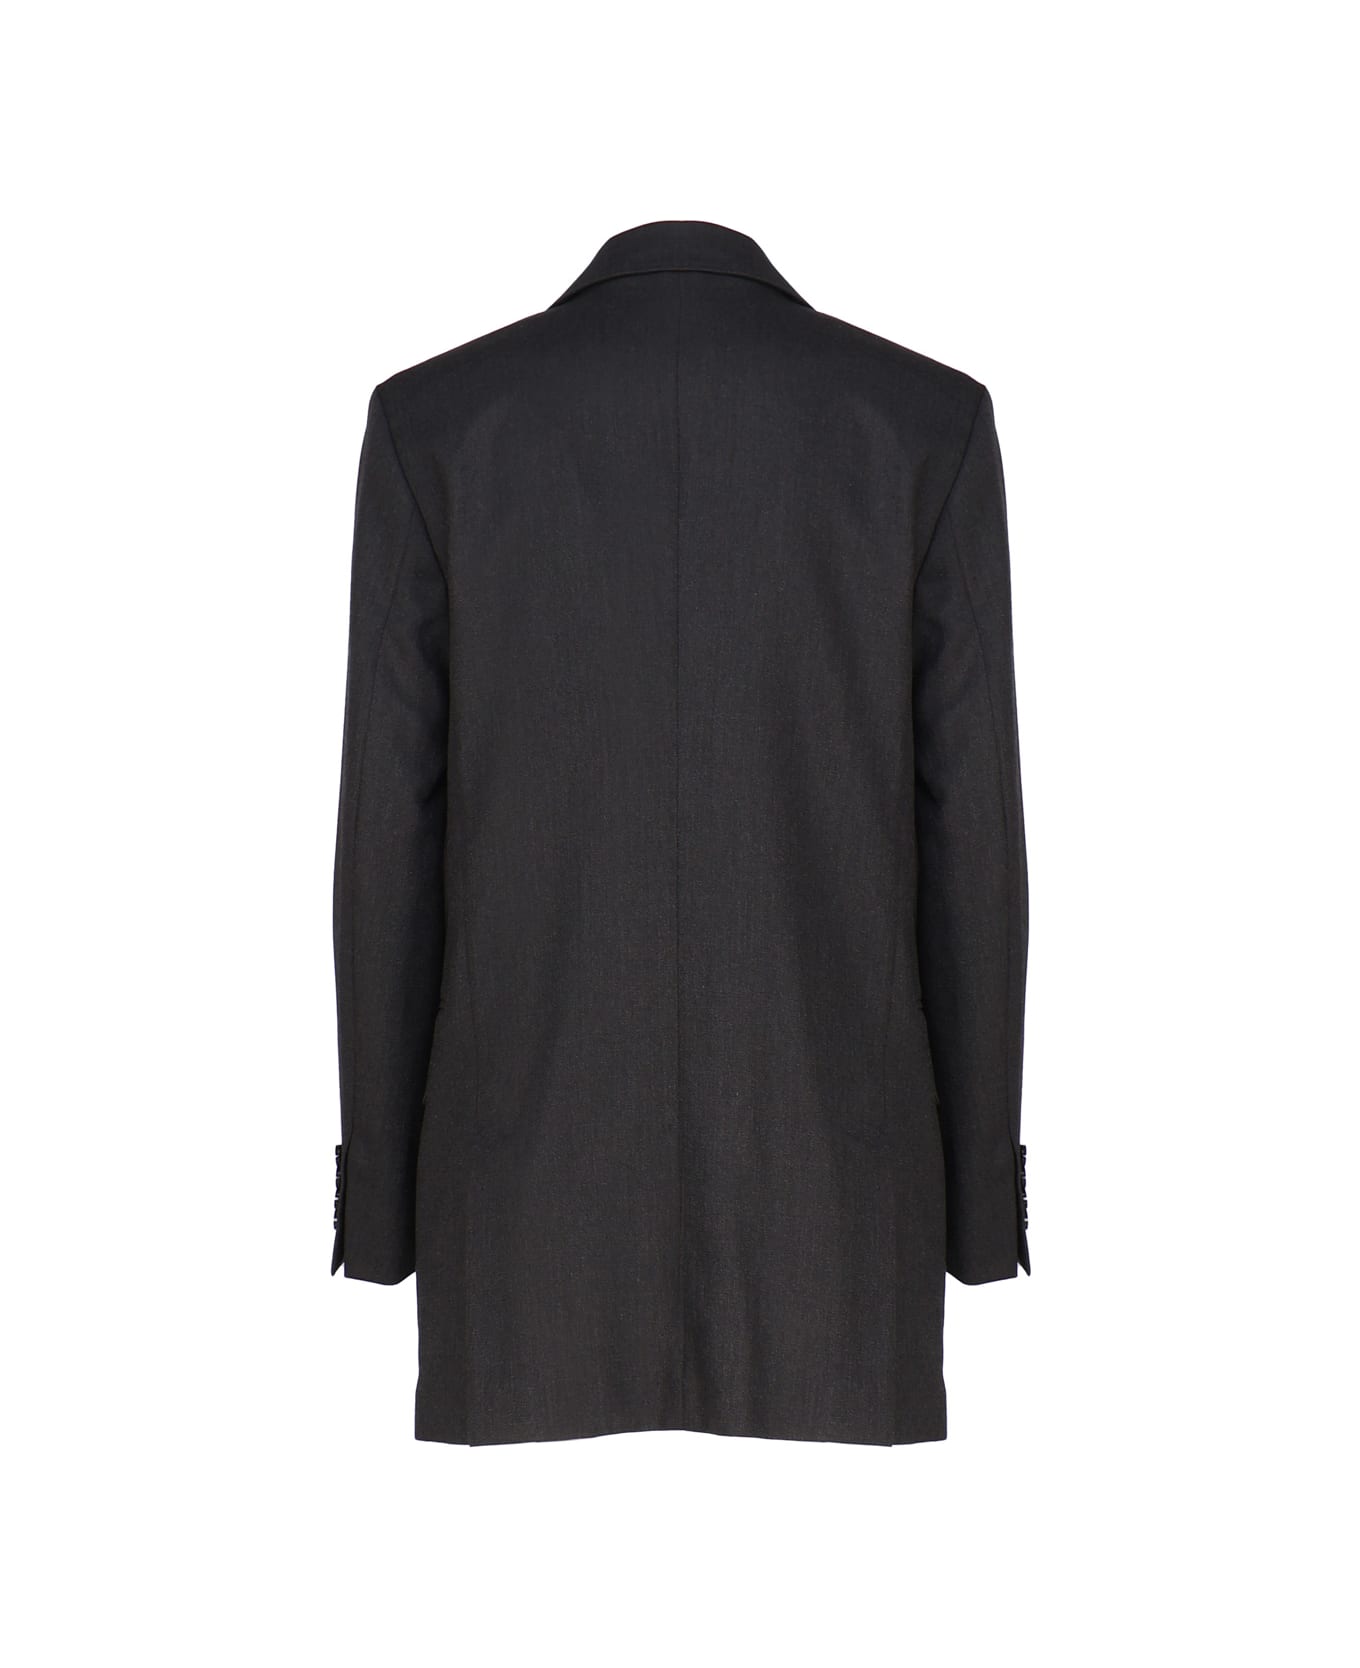 Max Mara Double Breasted Blazer In Wool Blend - Anthracite コート